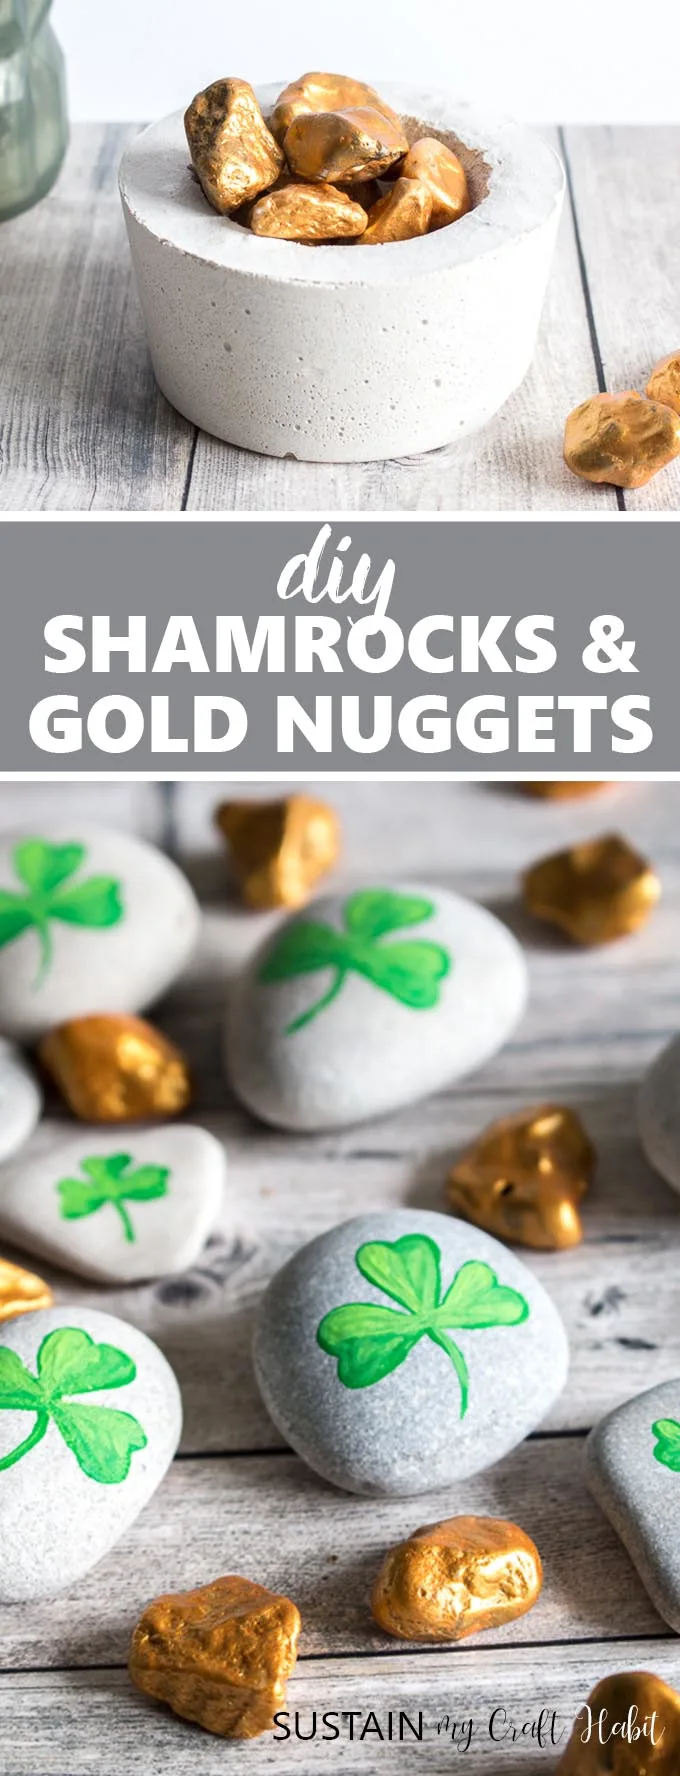 Collage of images showing the completed painted gold nuggets and shamrock stones for St. Patrick's Day.